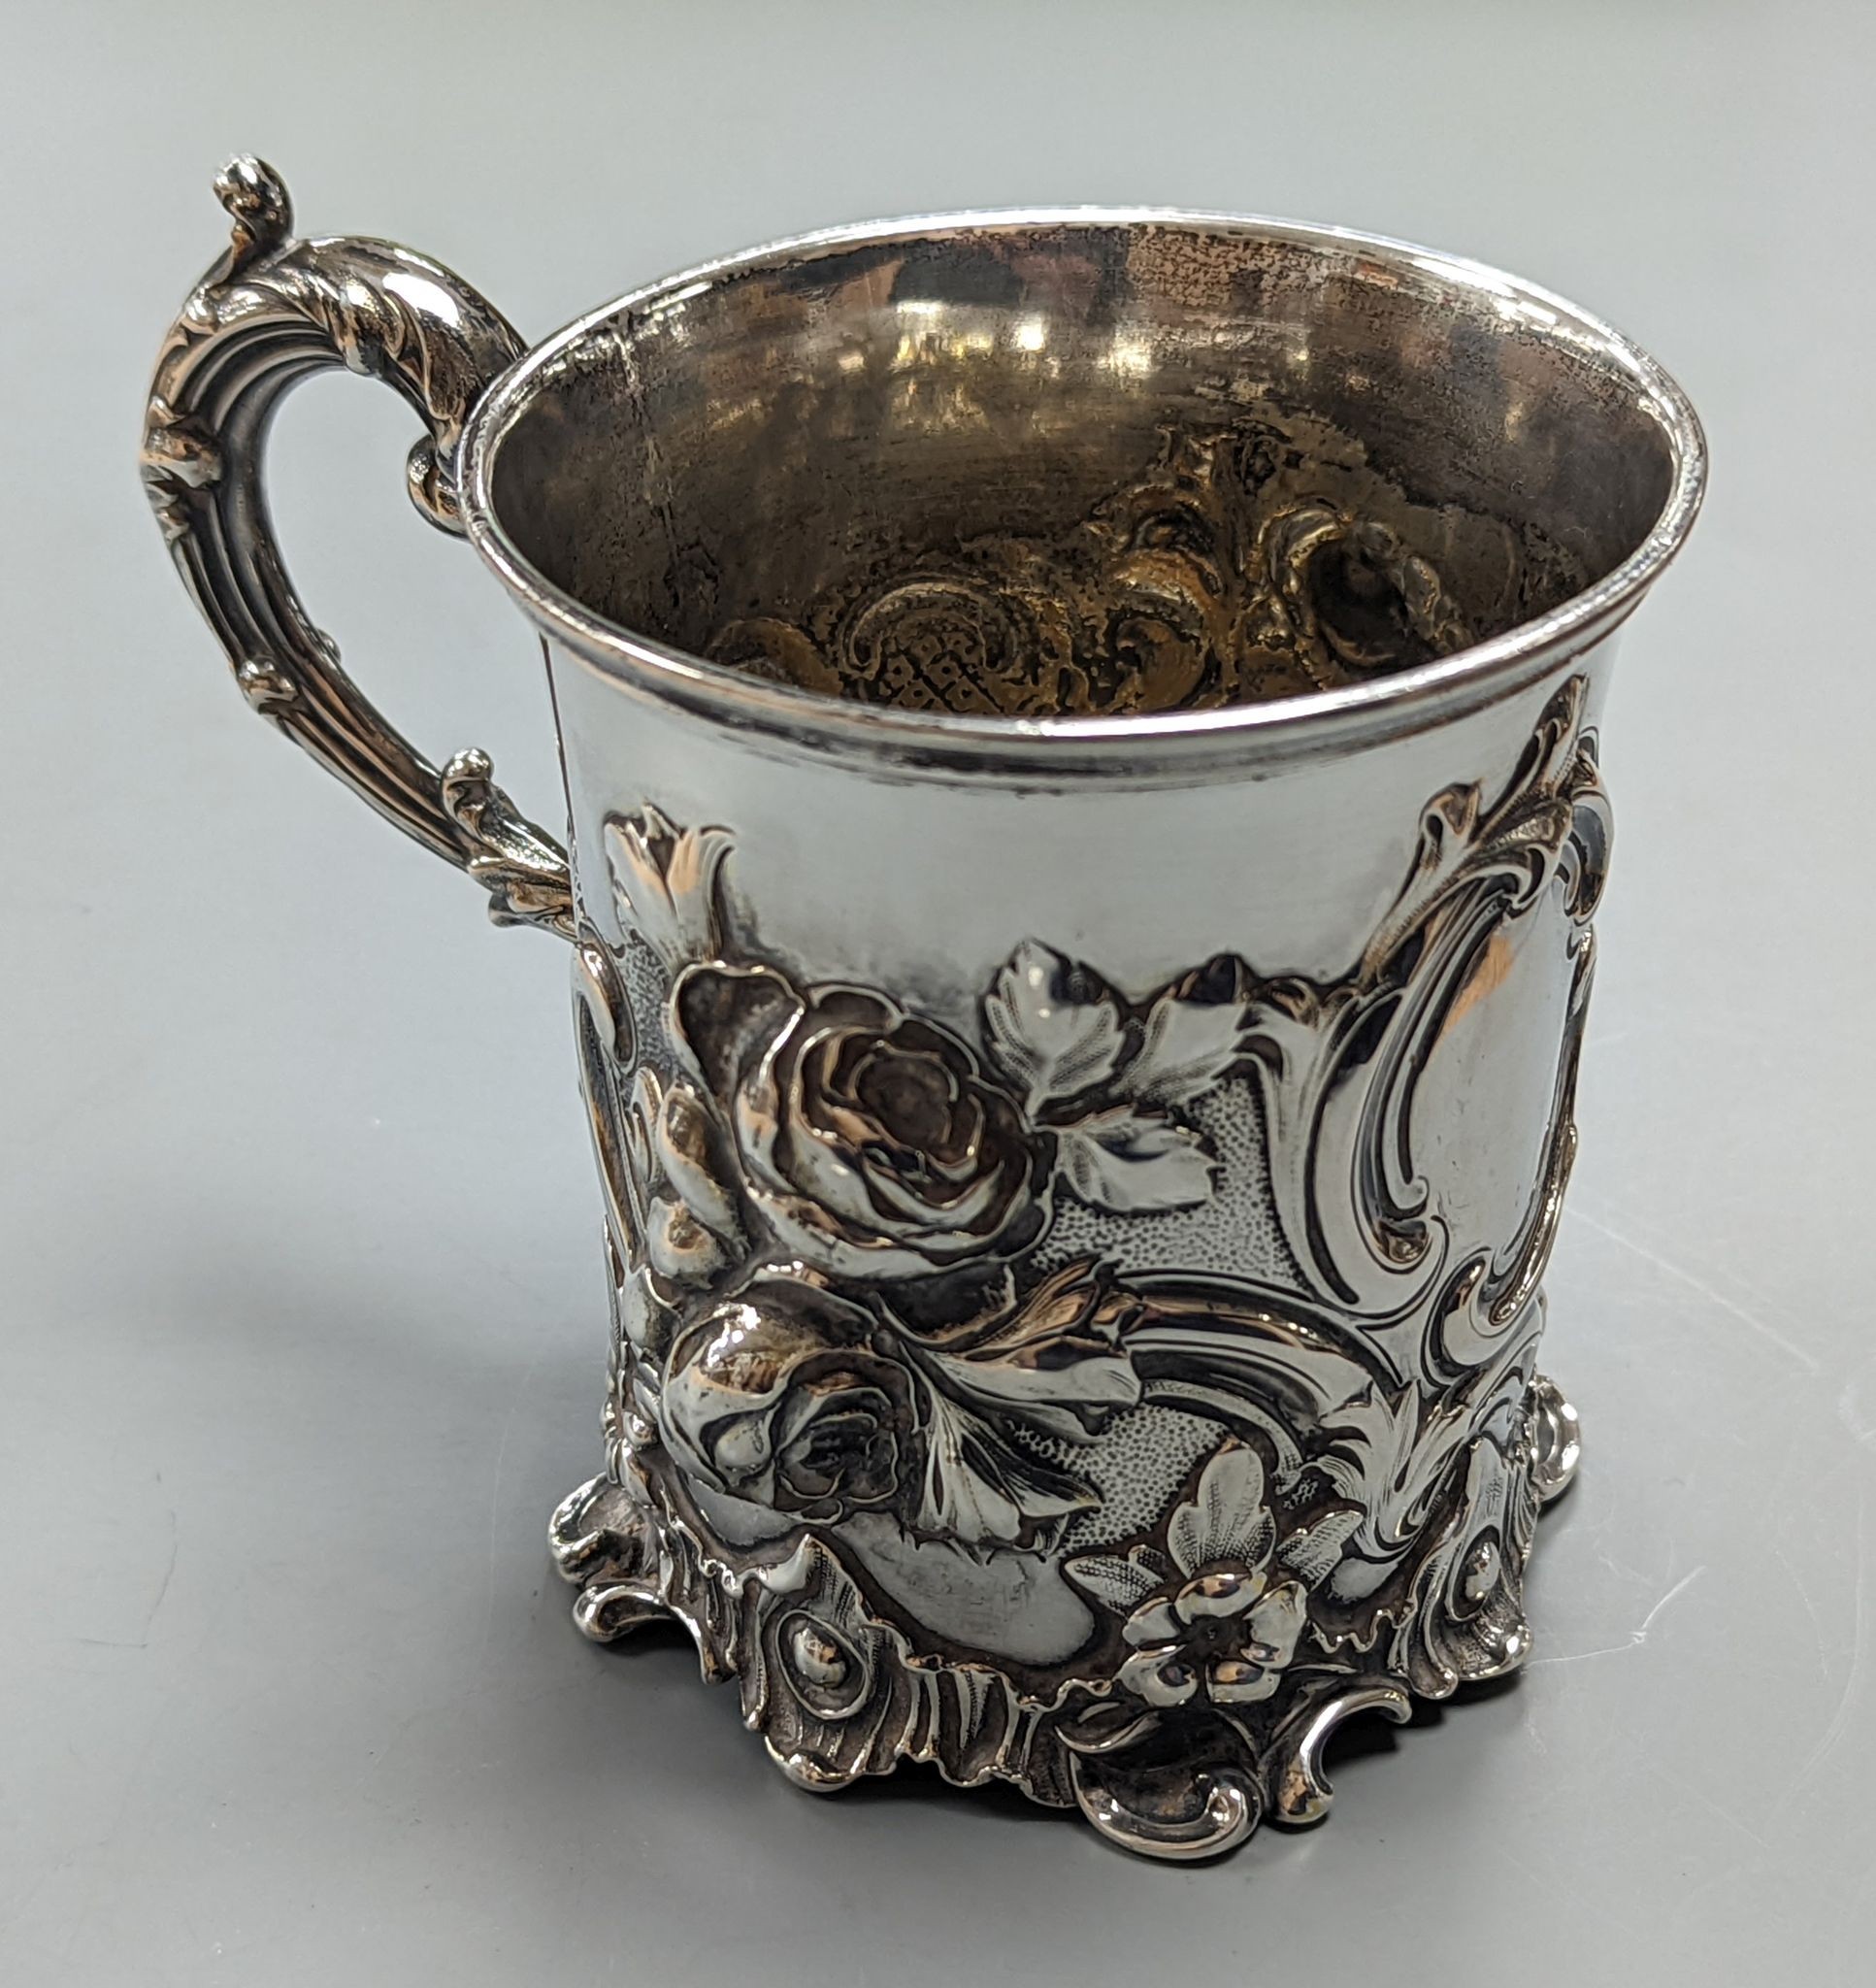 A Victorian embossed silver christening mug, decorated with roses amid scrolls, The Barnards, London, 1843, 9cm, 6.5oz.